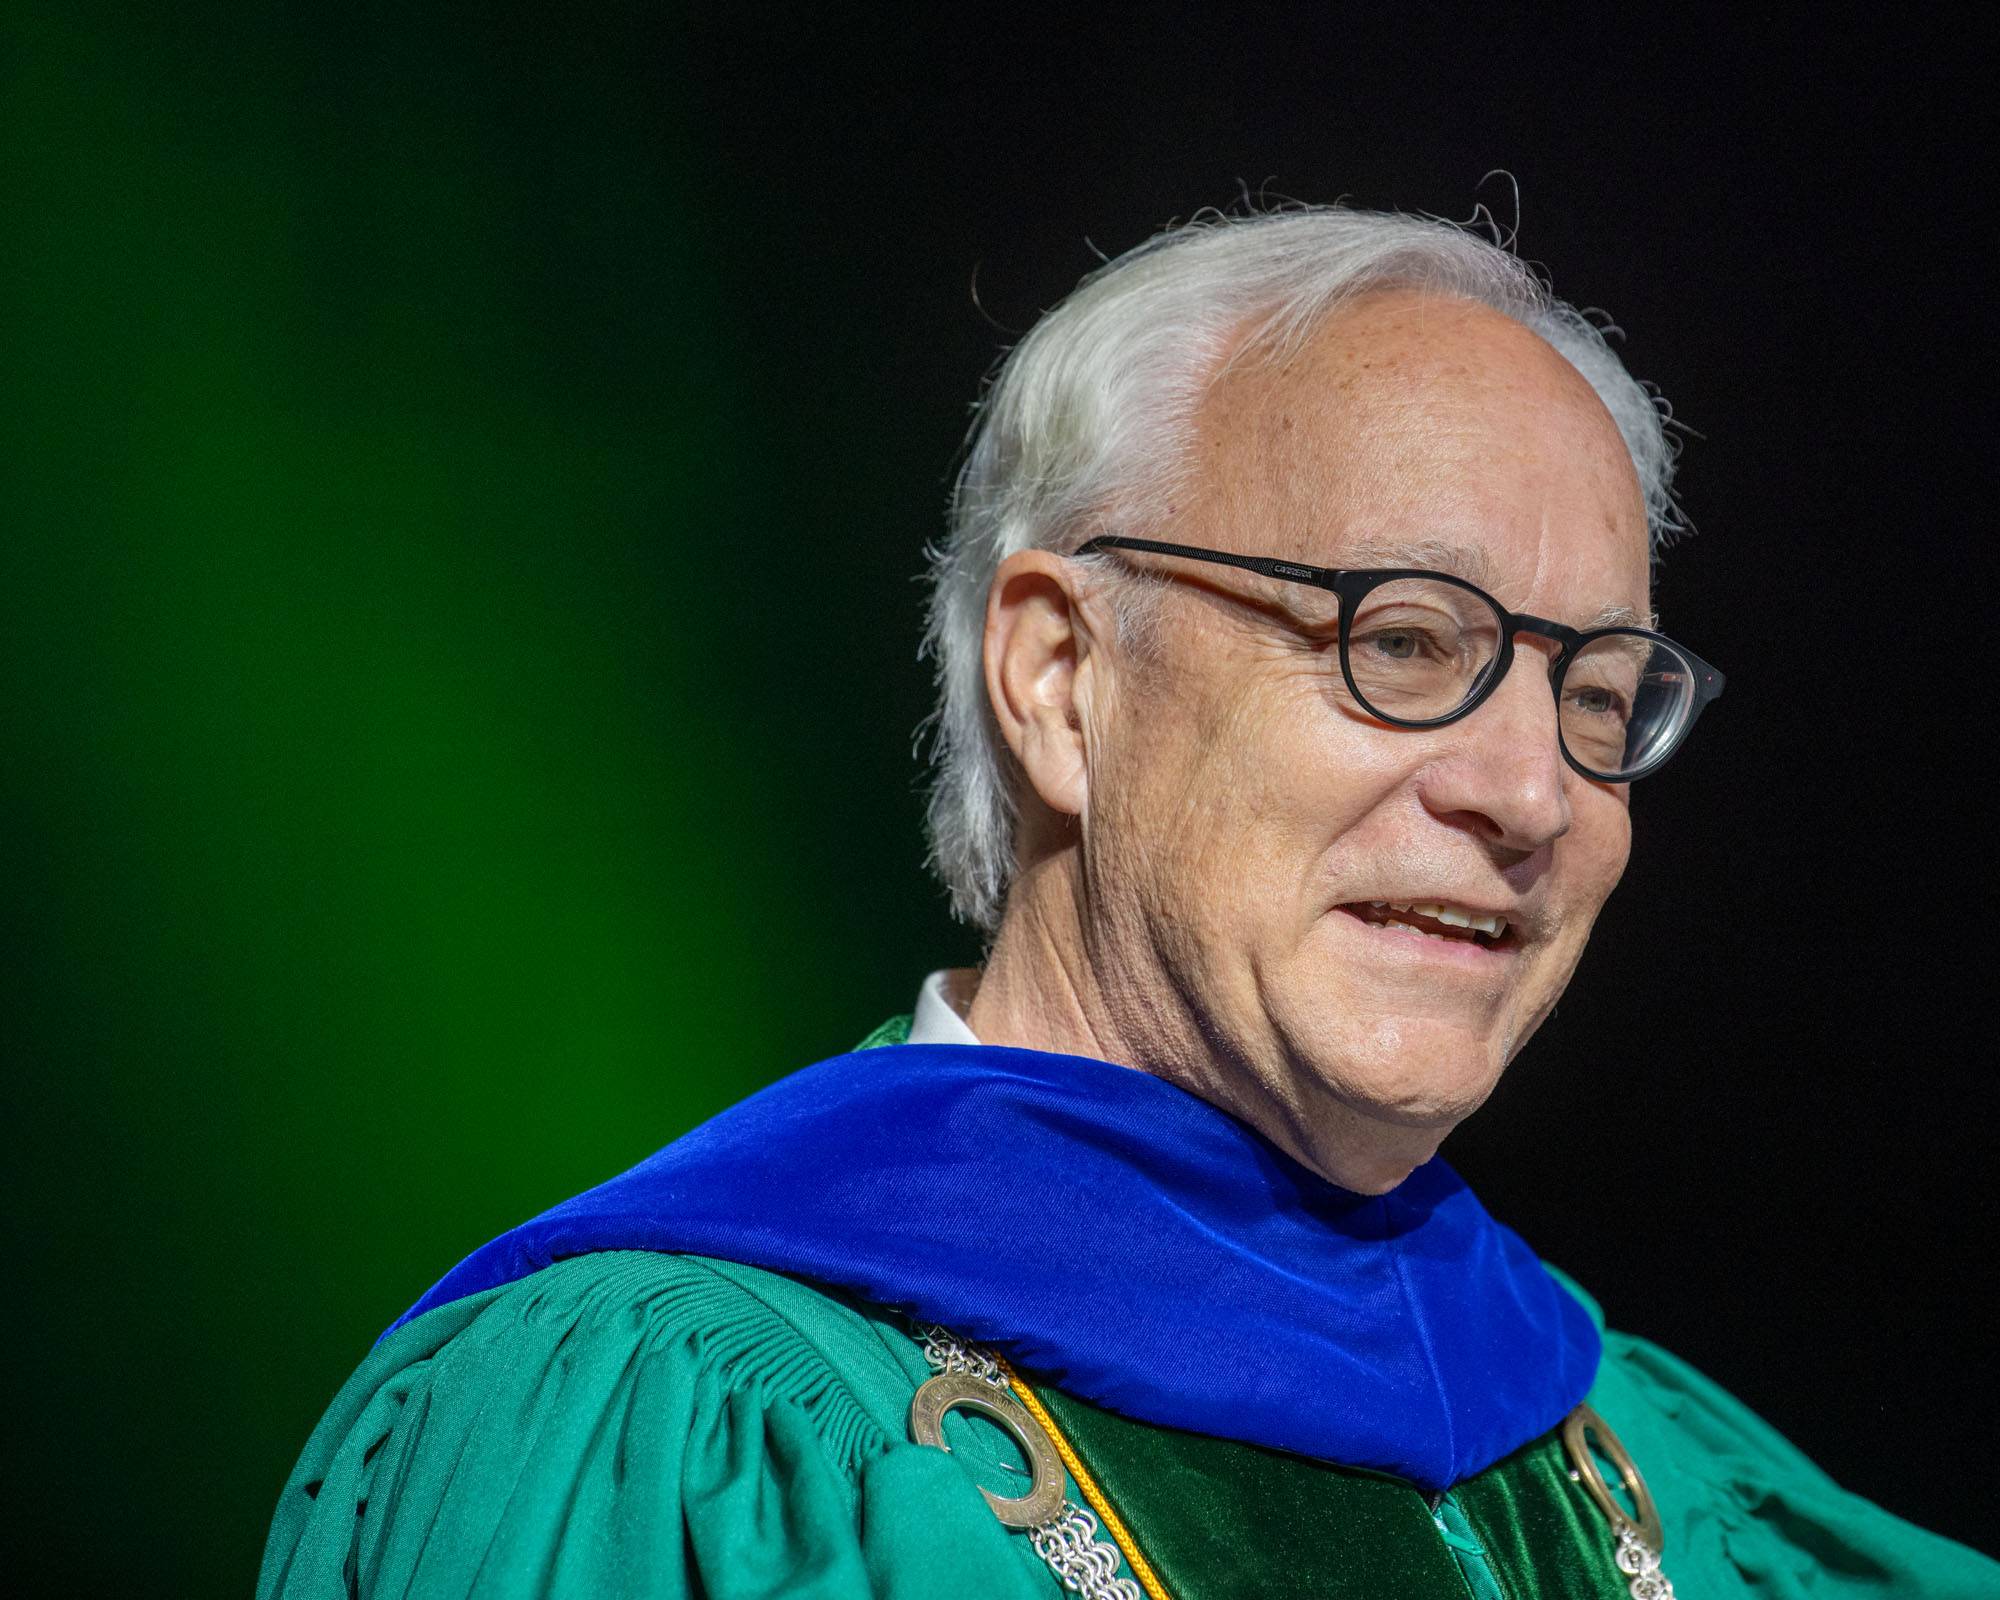 Ohio University President Hugh Sherman told the medical school graduates that they join a worldwide community of more than 280,000 proud Ohio University alumni. “You also join a community of noble professionals devoted to health, healing and caring,” he said